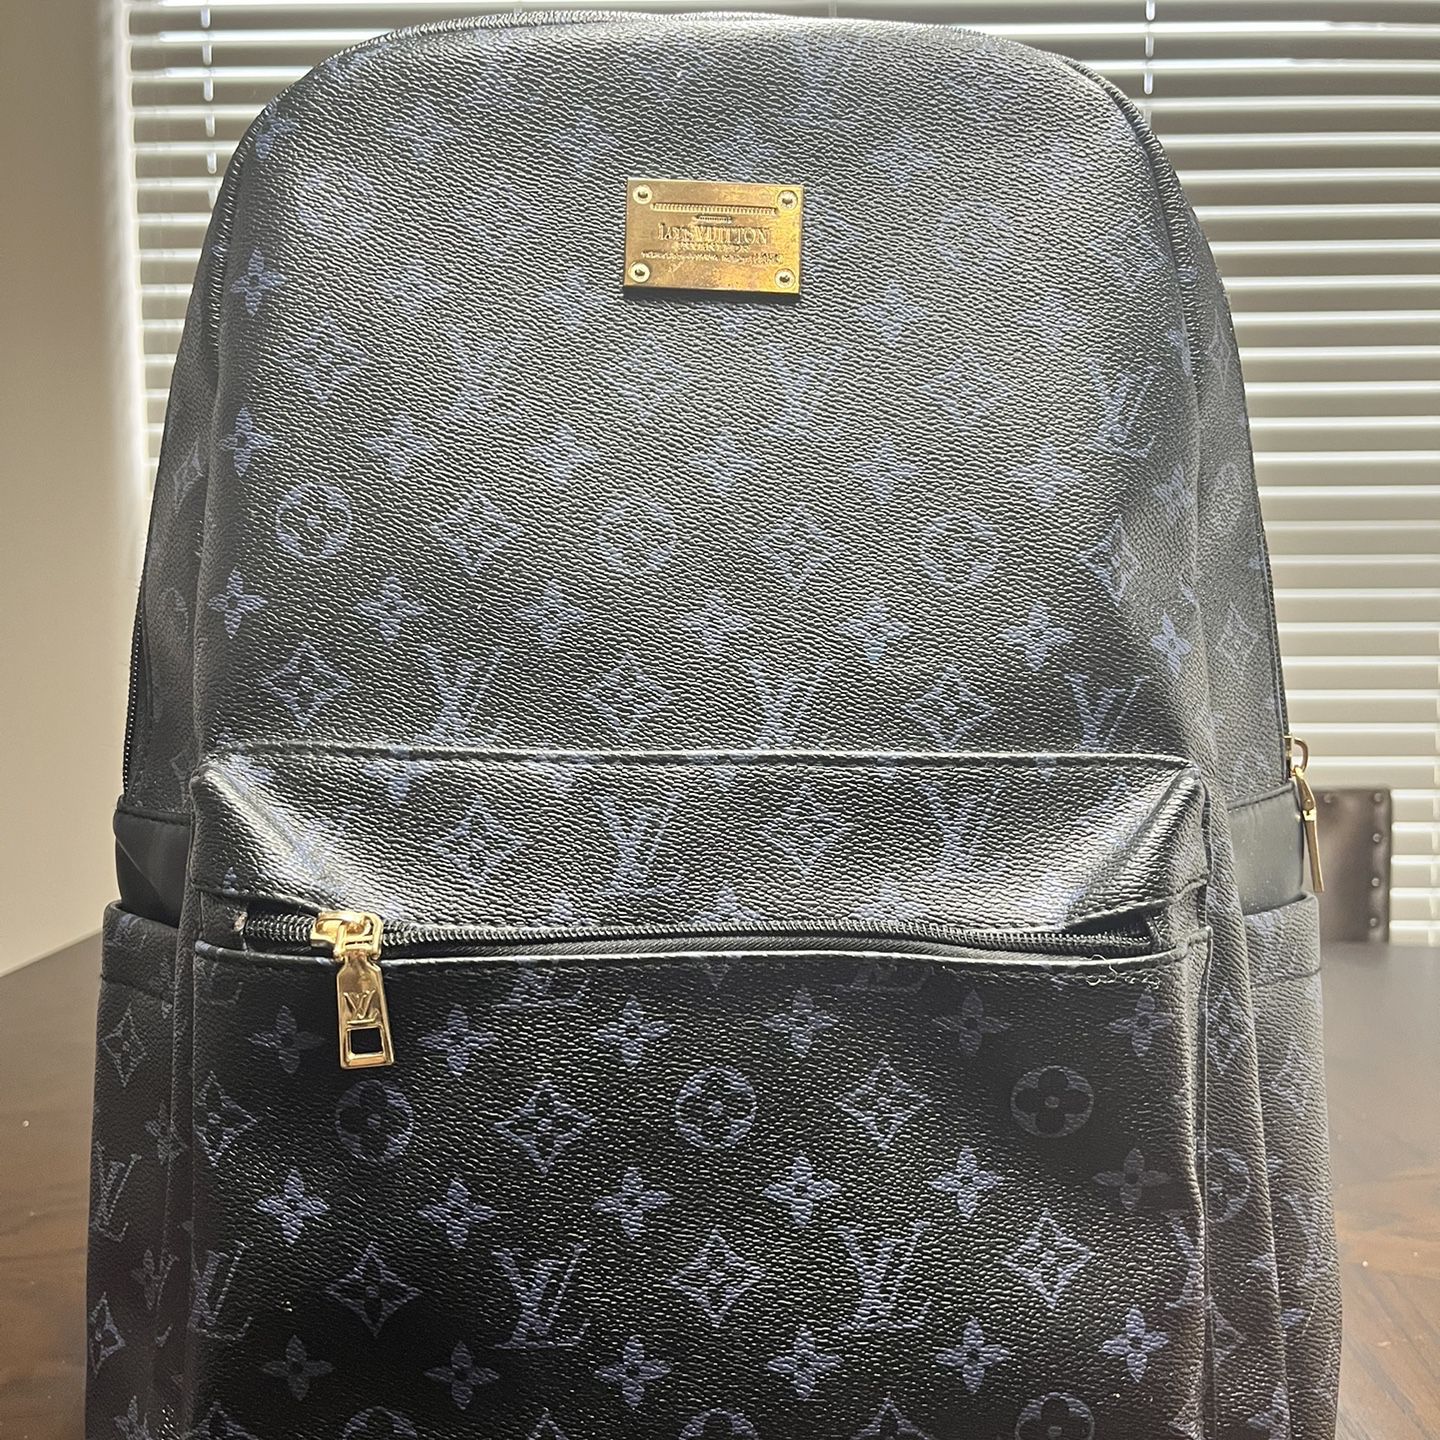 Louis Vuitton Discovery Backpack for Sale in San Antonio, TX - OfferUp